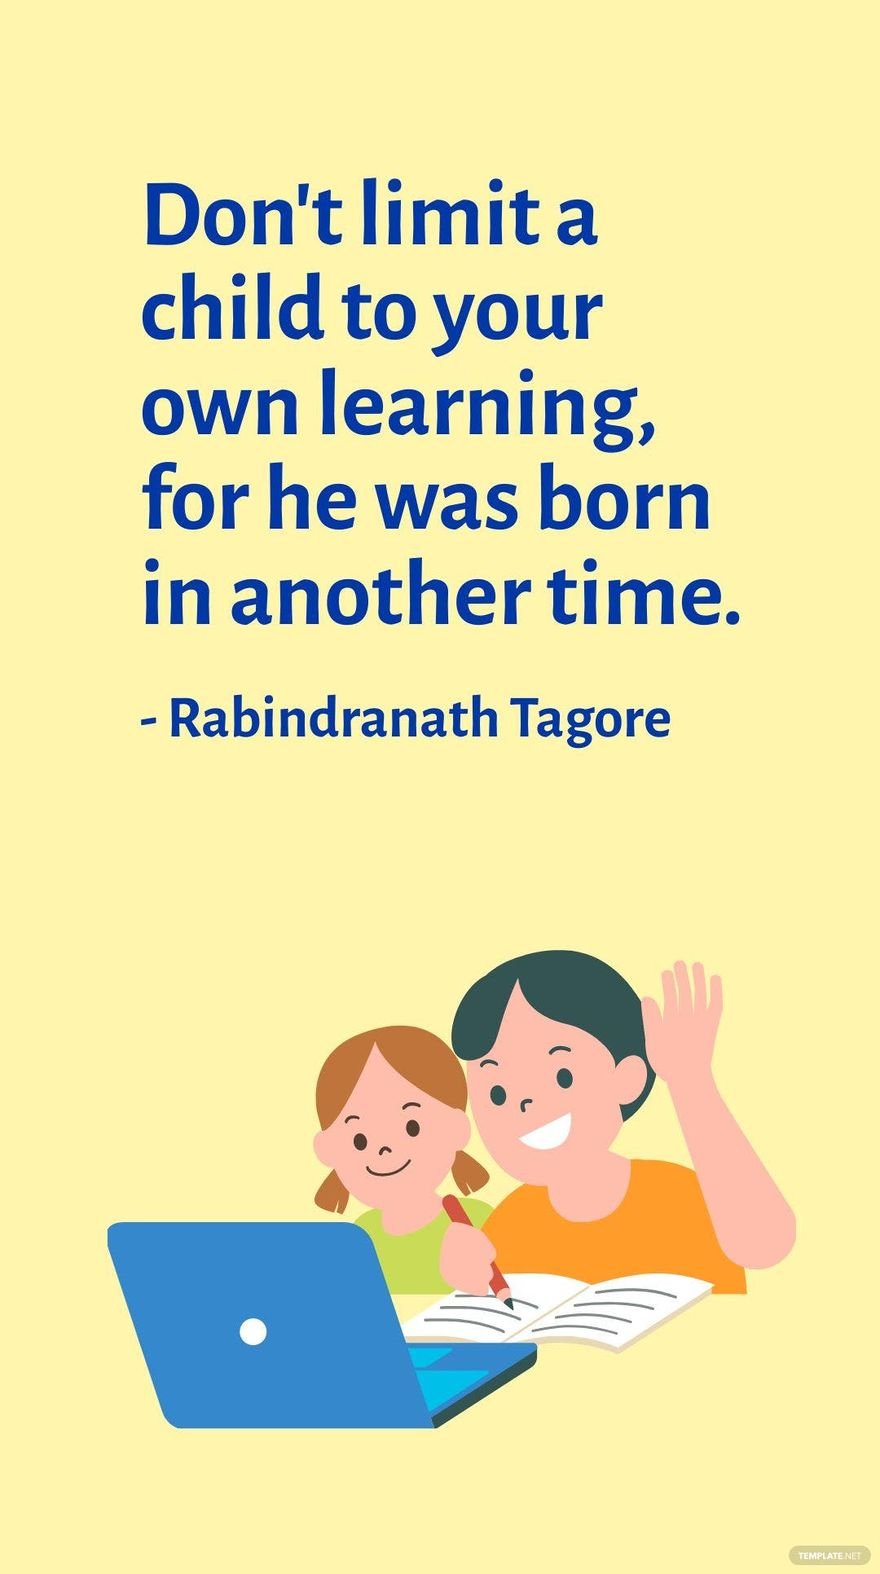 Free Rabindranath Tagore - Don't limit a child to your own learning, for he was born in another time. in JPG